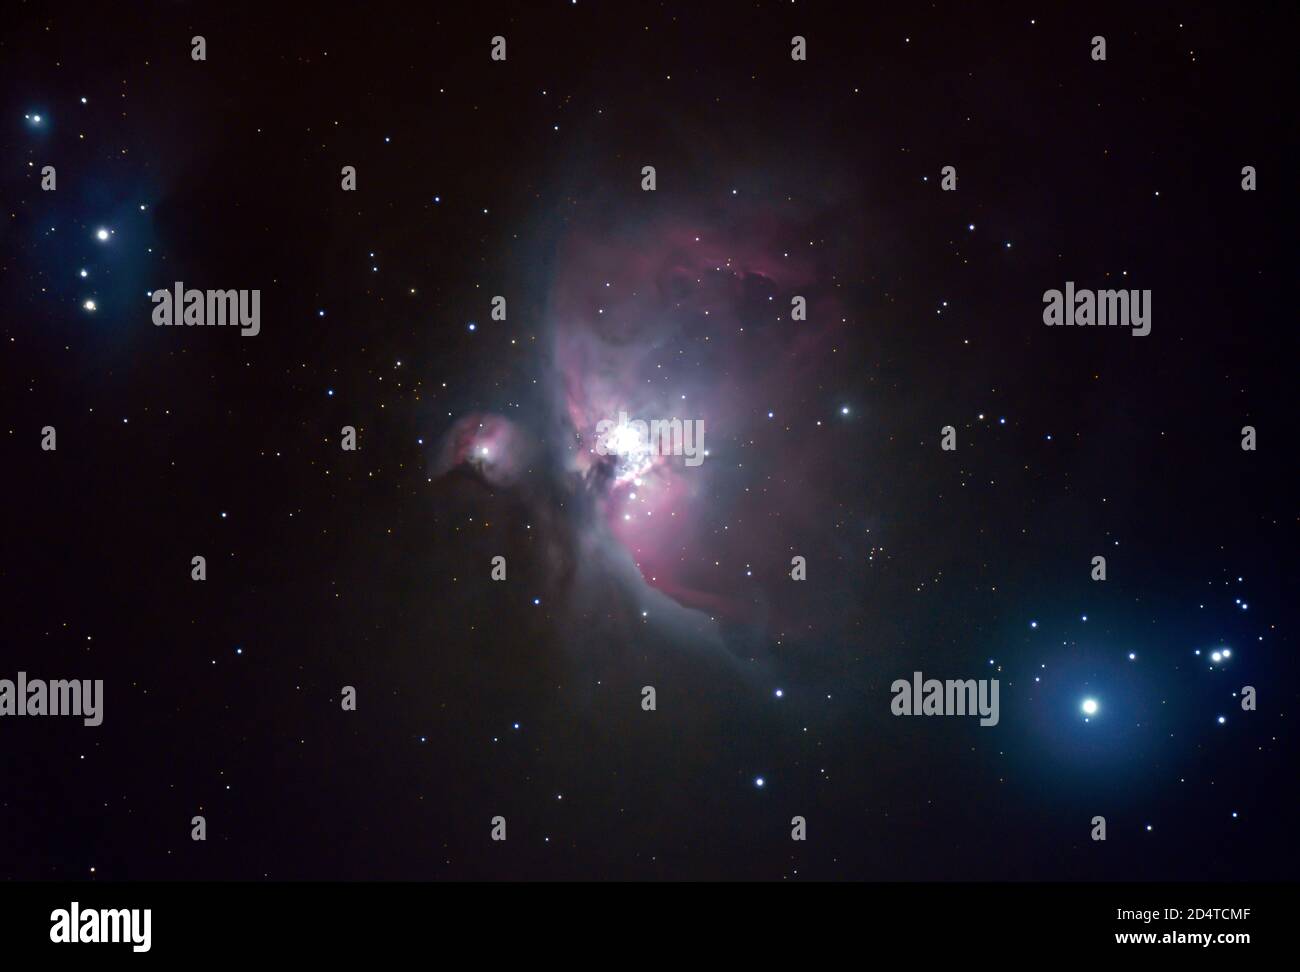 The Orion Nebula, M42, a diffuse nebula photographed from London, UK, 10 October 2020 with multiple long exposures with standard Nikon Z7 camera and 5' refracting telescope. Also visible is M43 to left of main nebula and (top left) NGC 1977, The Running Man Nebula. The blue star lower right is double star Nair al Saif. The Orion Nebula is approx 1,600 light years from planet Earth. Credit: Malcolm Park/Alamy. Stock Photo